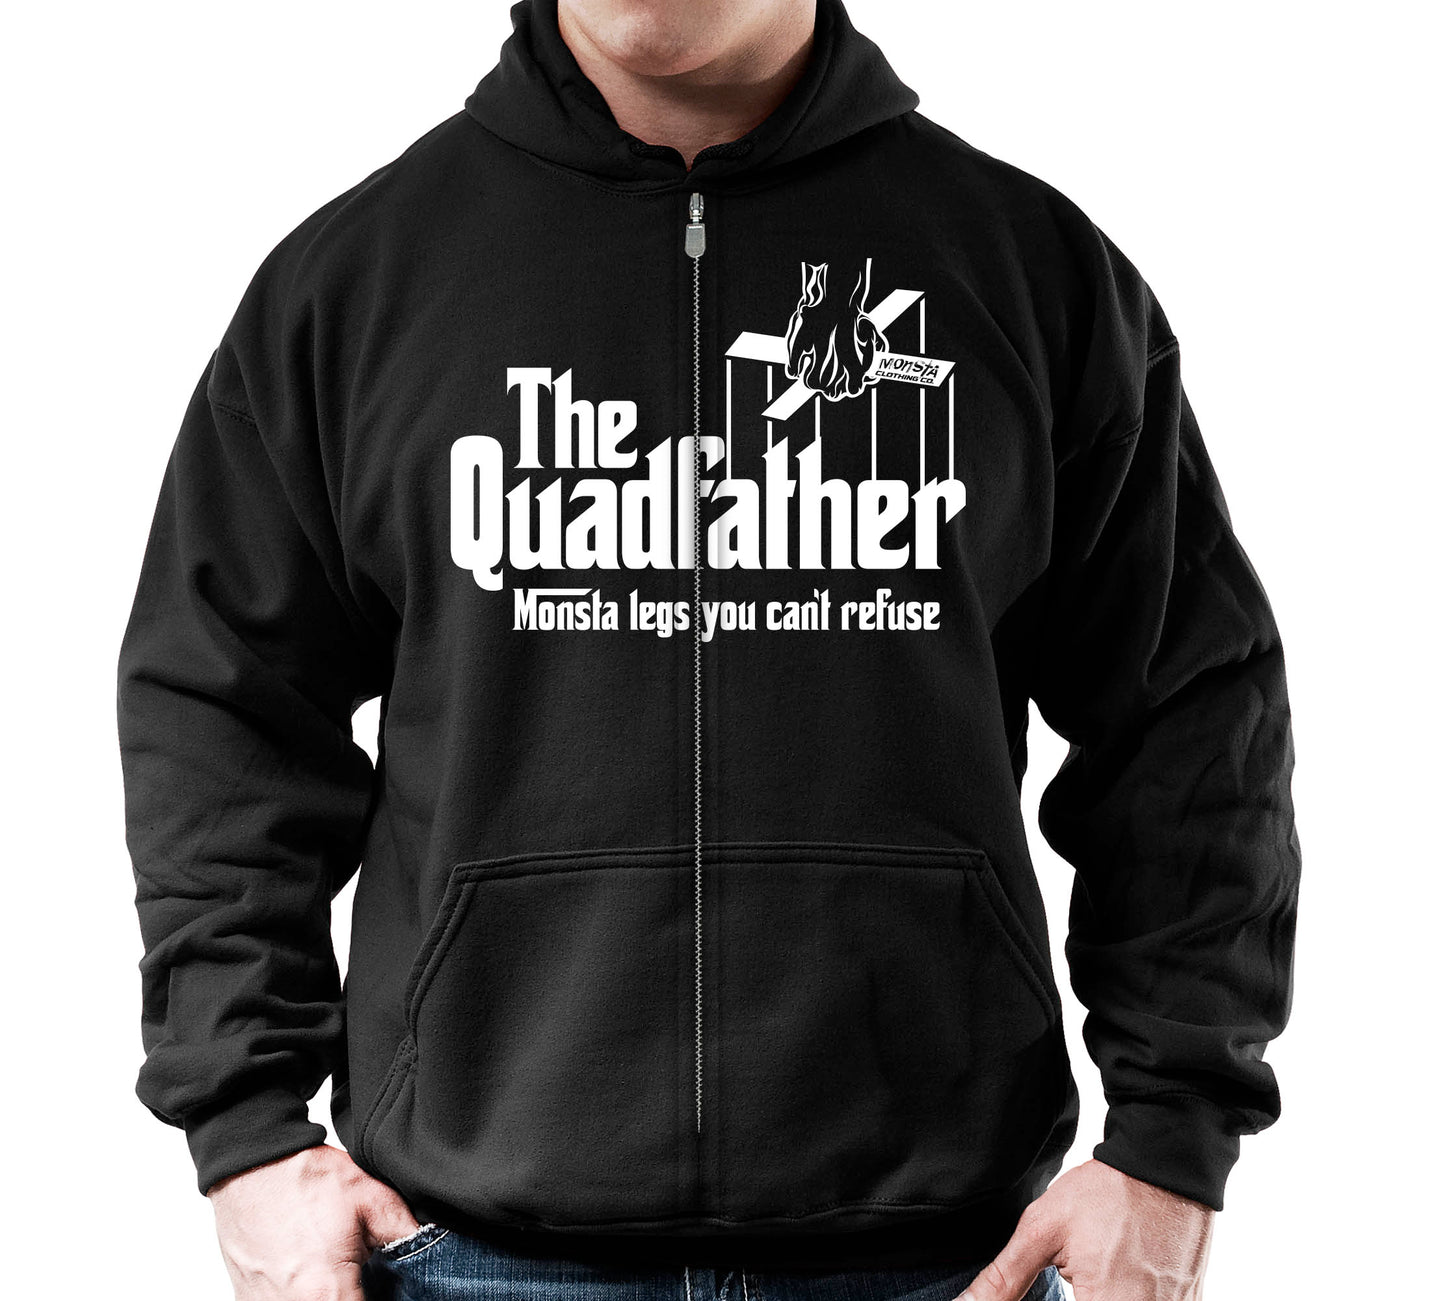 The QuadFather (Monsta Legs You Can’t Refuse)-306